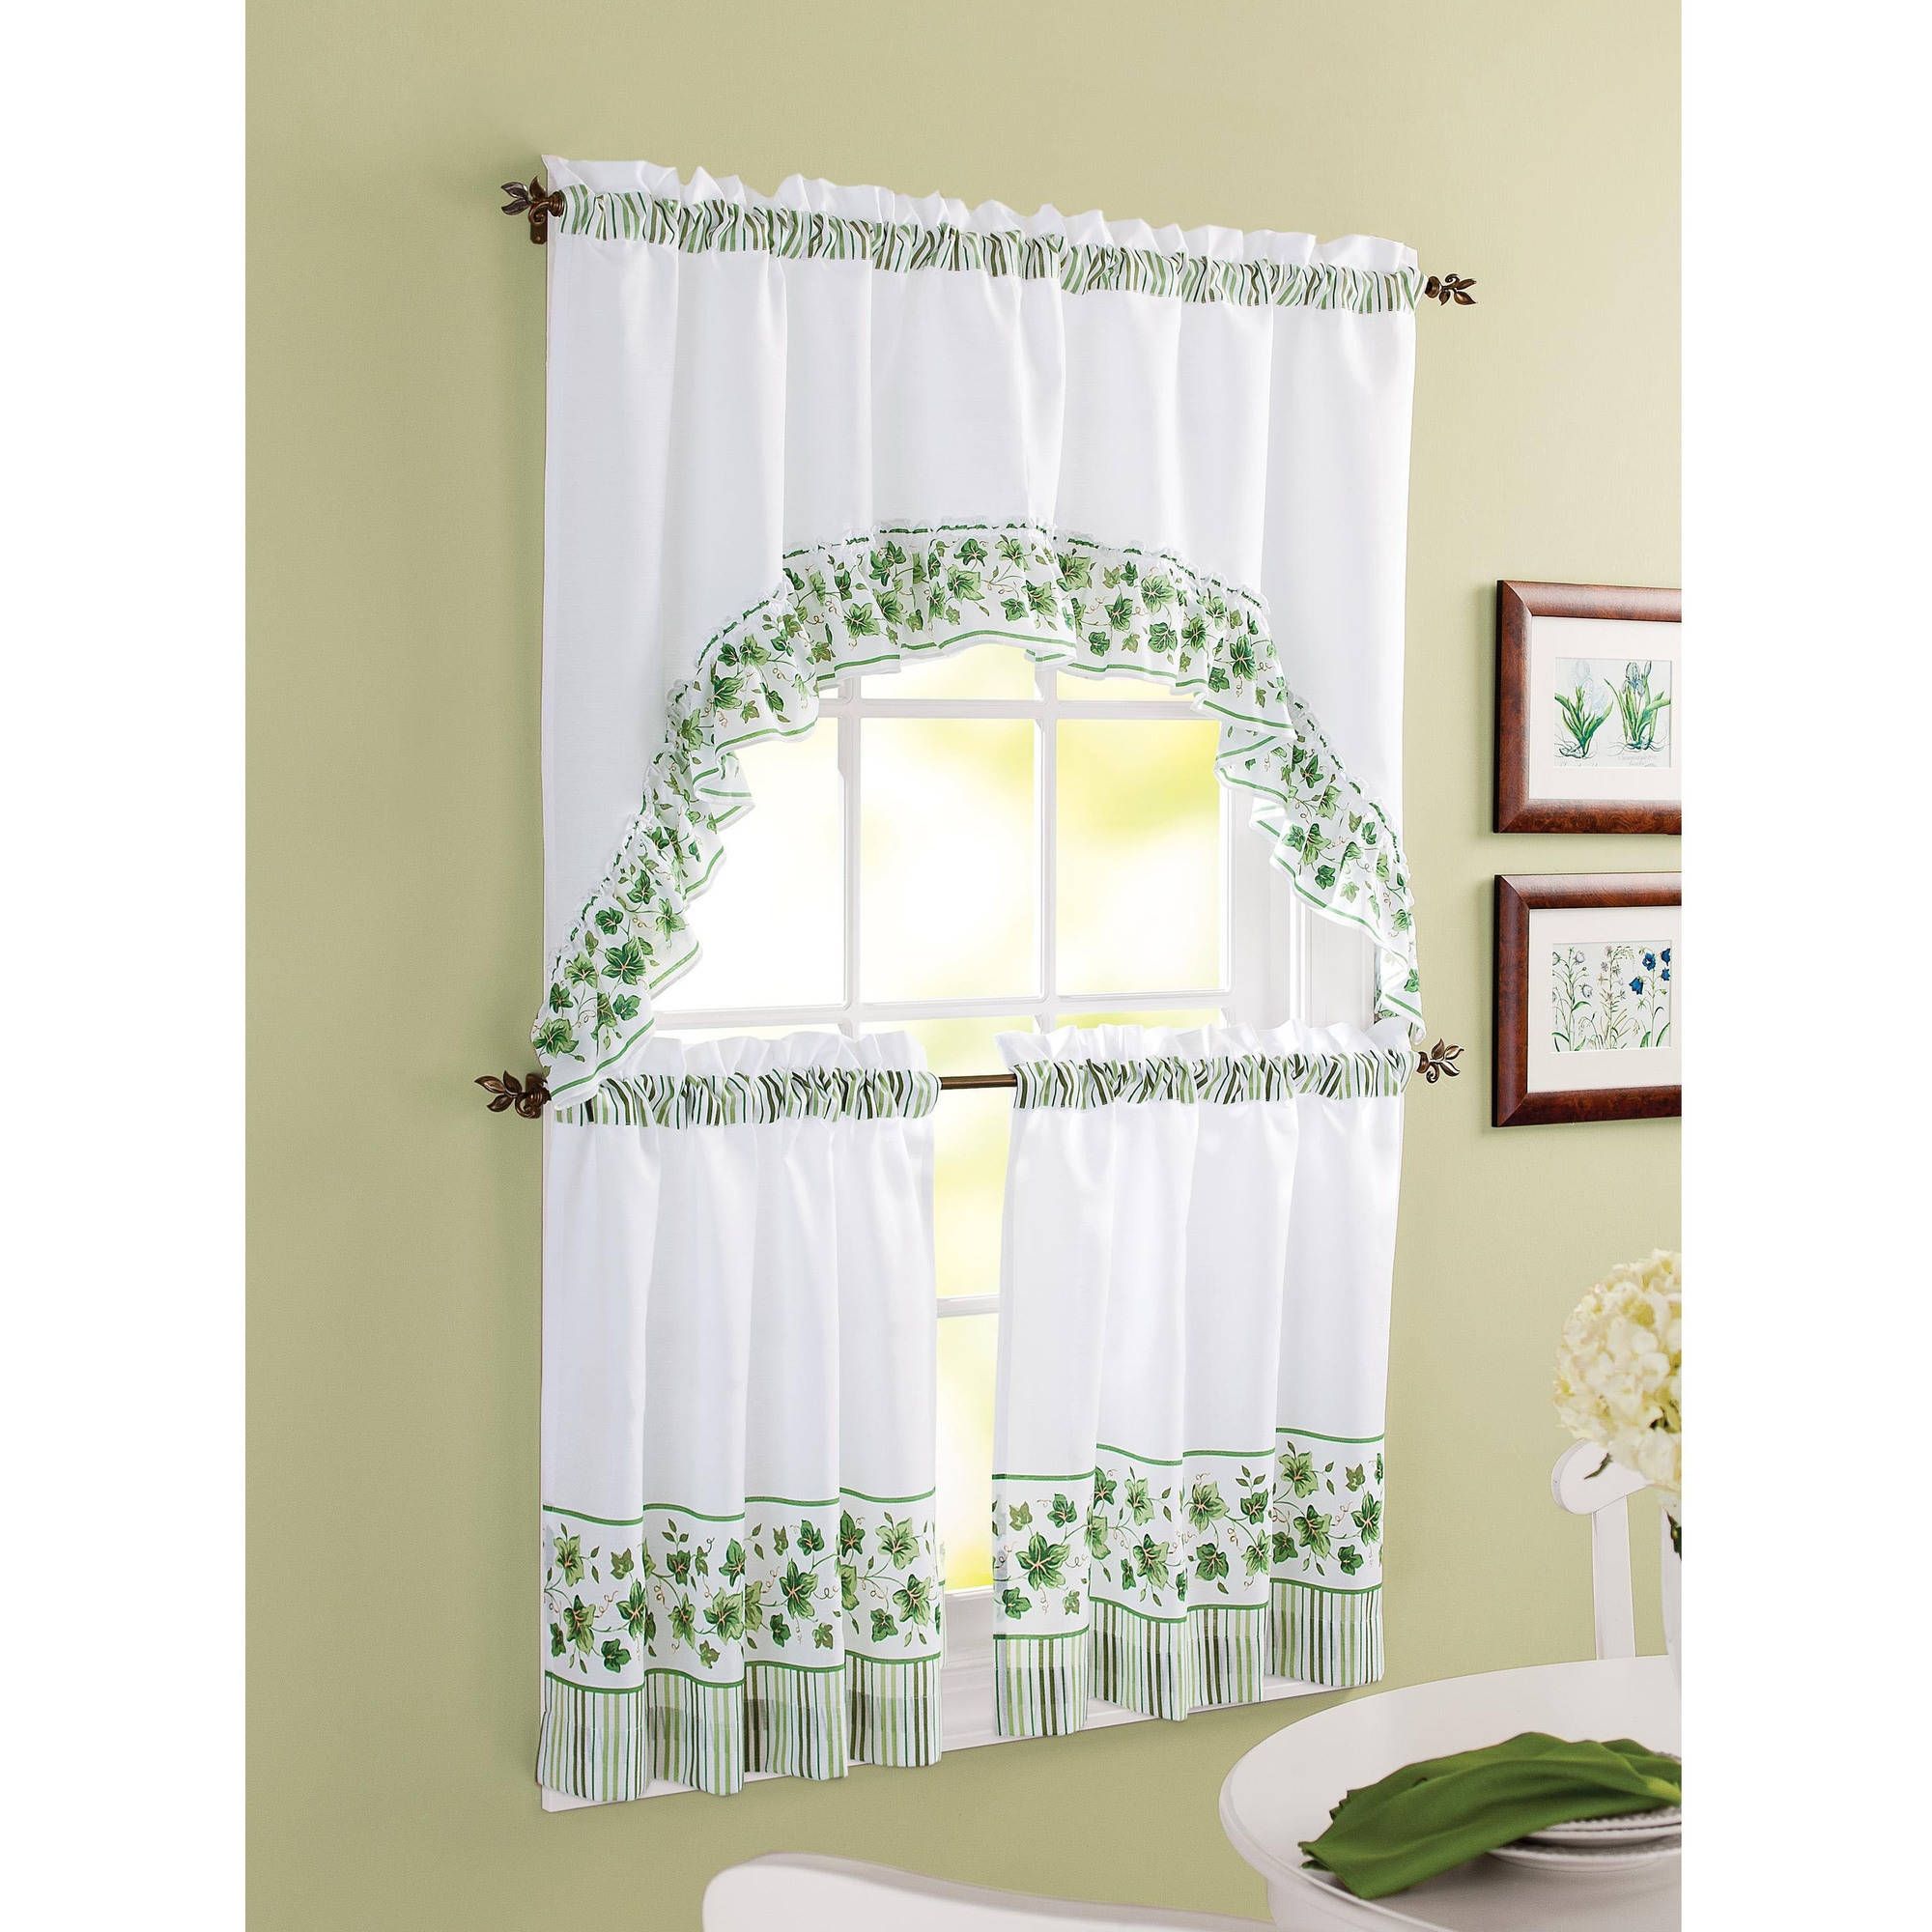 Curtains Sage Green Kitchen Curtains Decor Inspiring Wakefield Pertaining To Sage Green Kitchen Curtains (View 5 of 25)